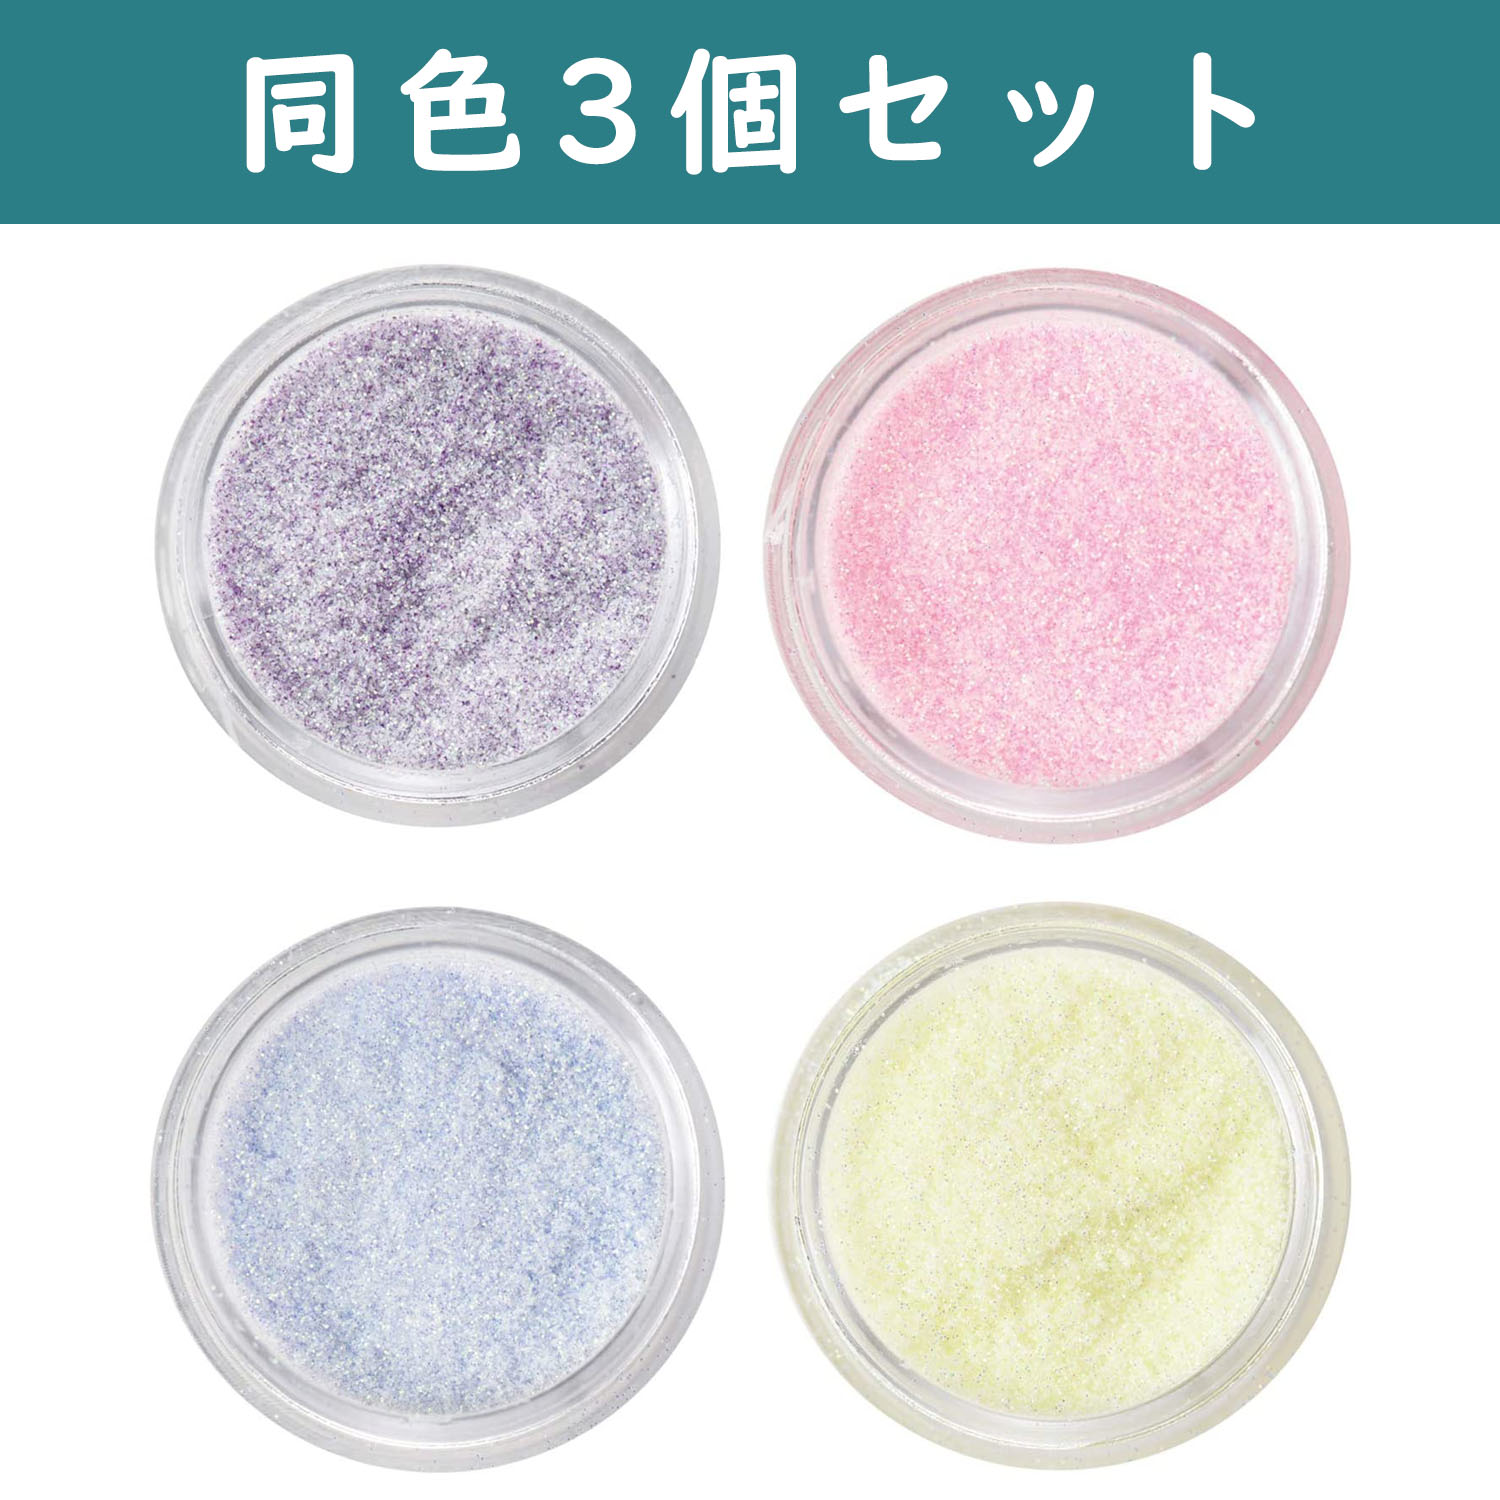 T10 Sugar-like powder approx.0.4g/1pc Set of 3 of the same color (set)